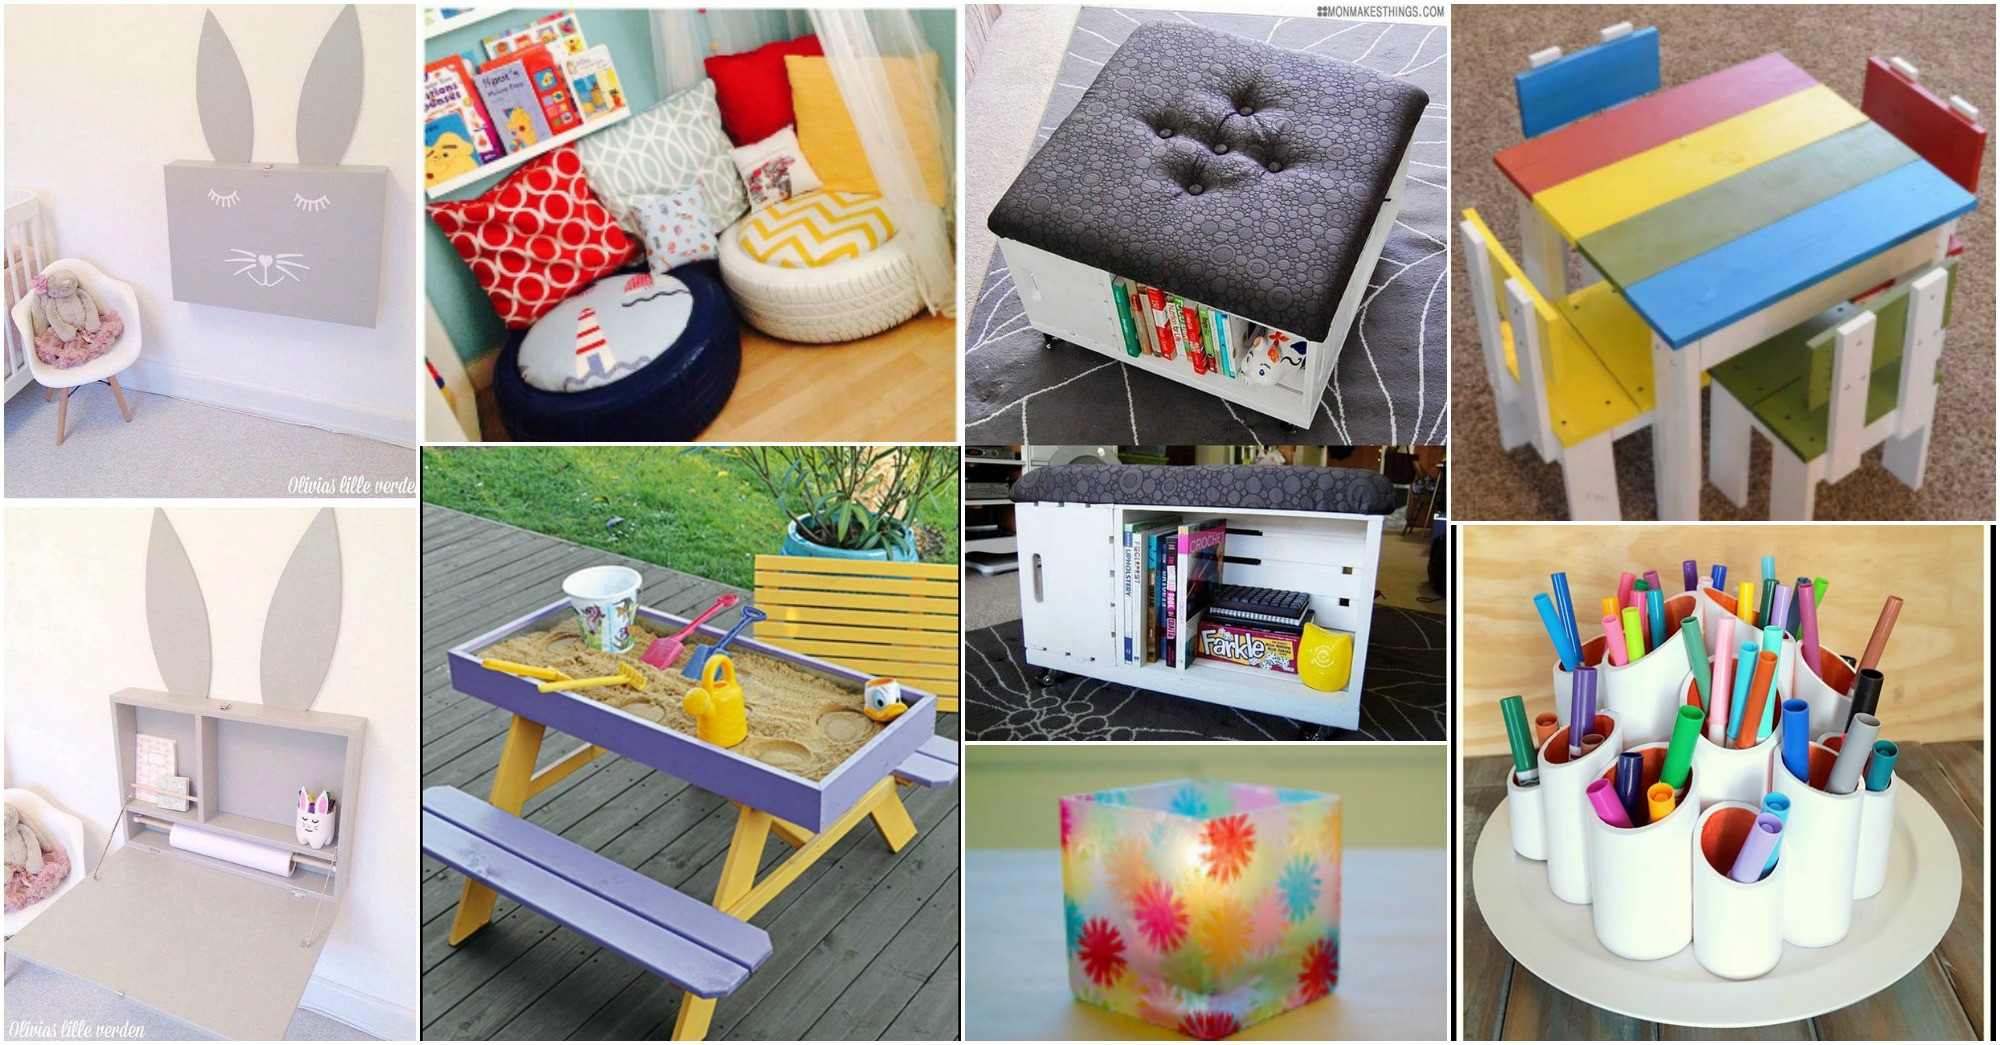 DIY Projects For Kids Room
 DIY Cool Kids Room Crafts That Will Make Your Kids Feel